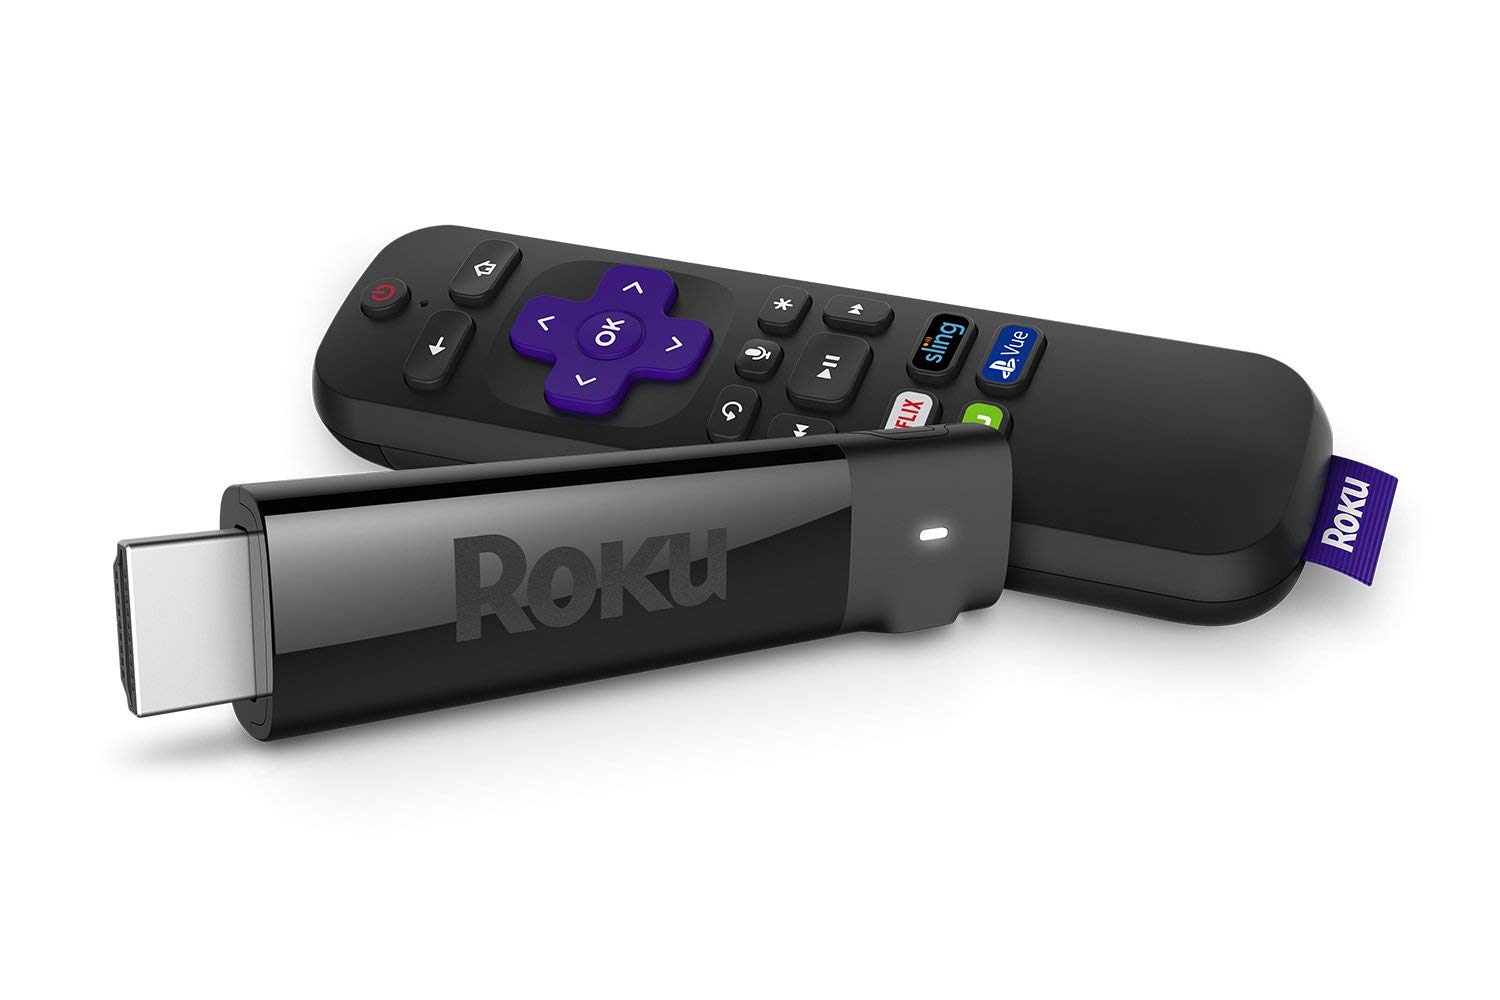 Here Are The Top 10 FREE Roku Channels as of August 2019 According to Roku